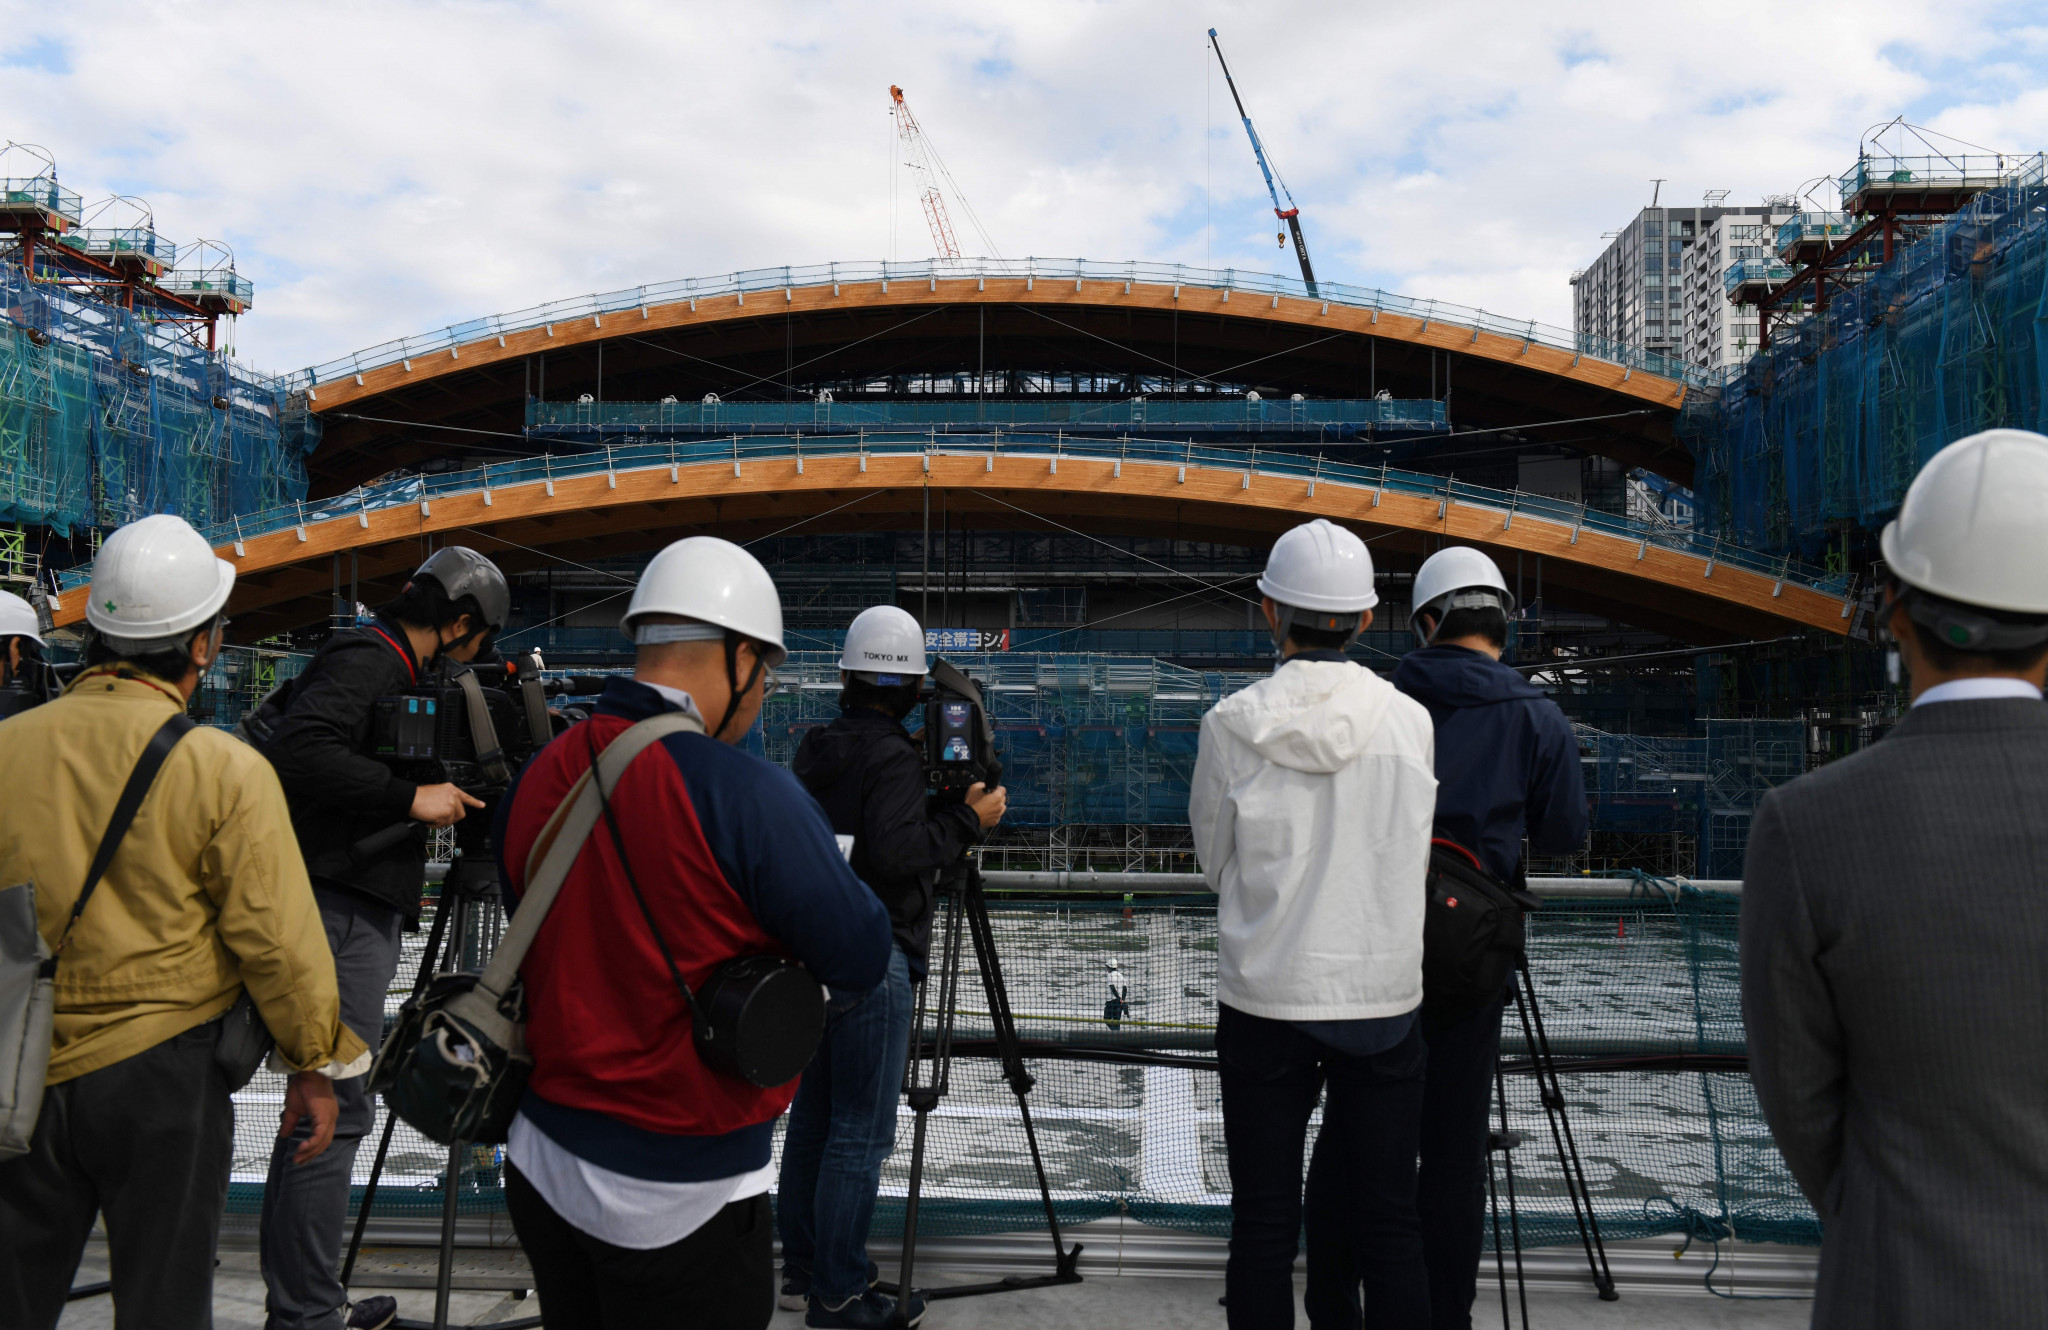 Construction of the arena's wooden roof has reached the half way stage ©Getty Images